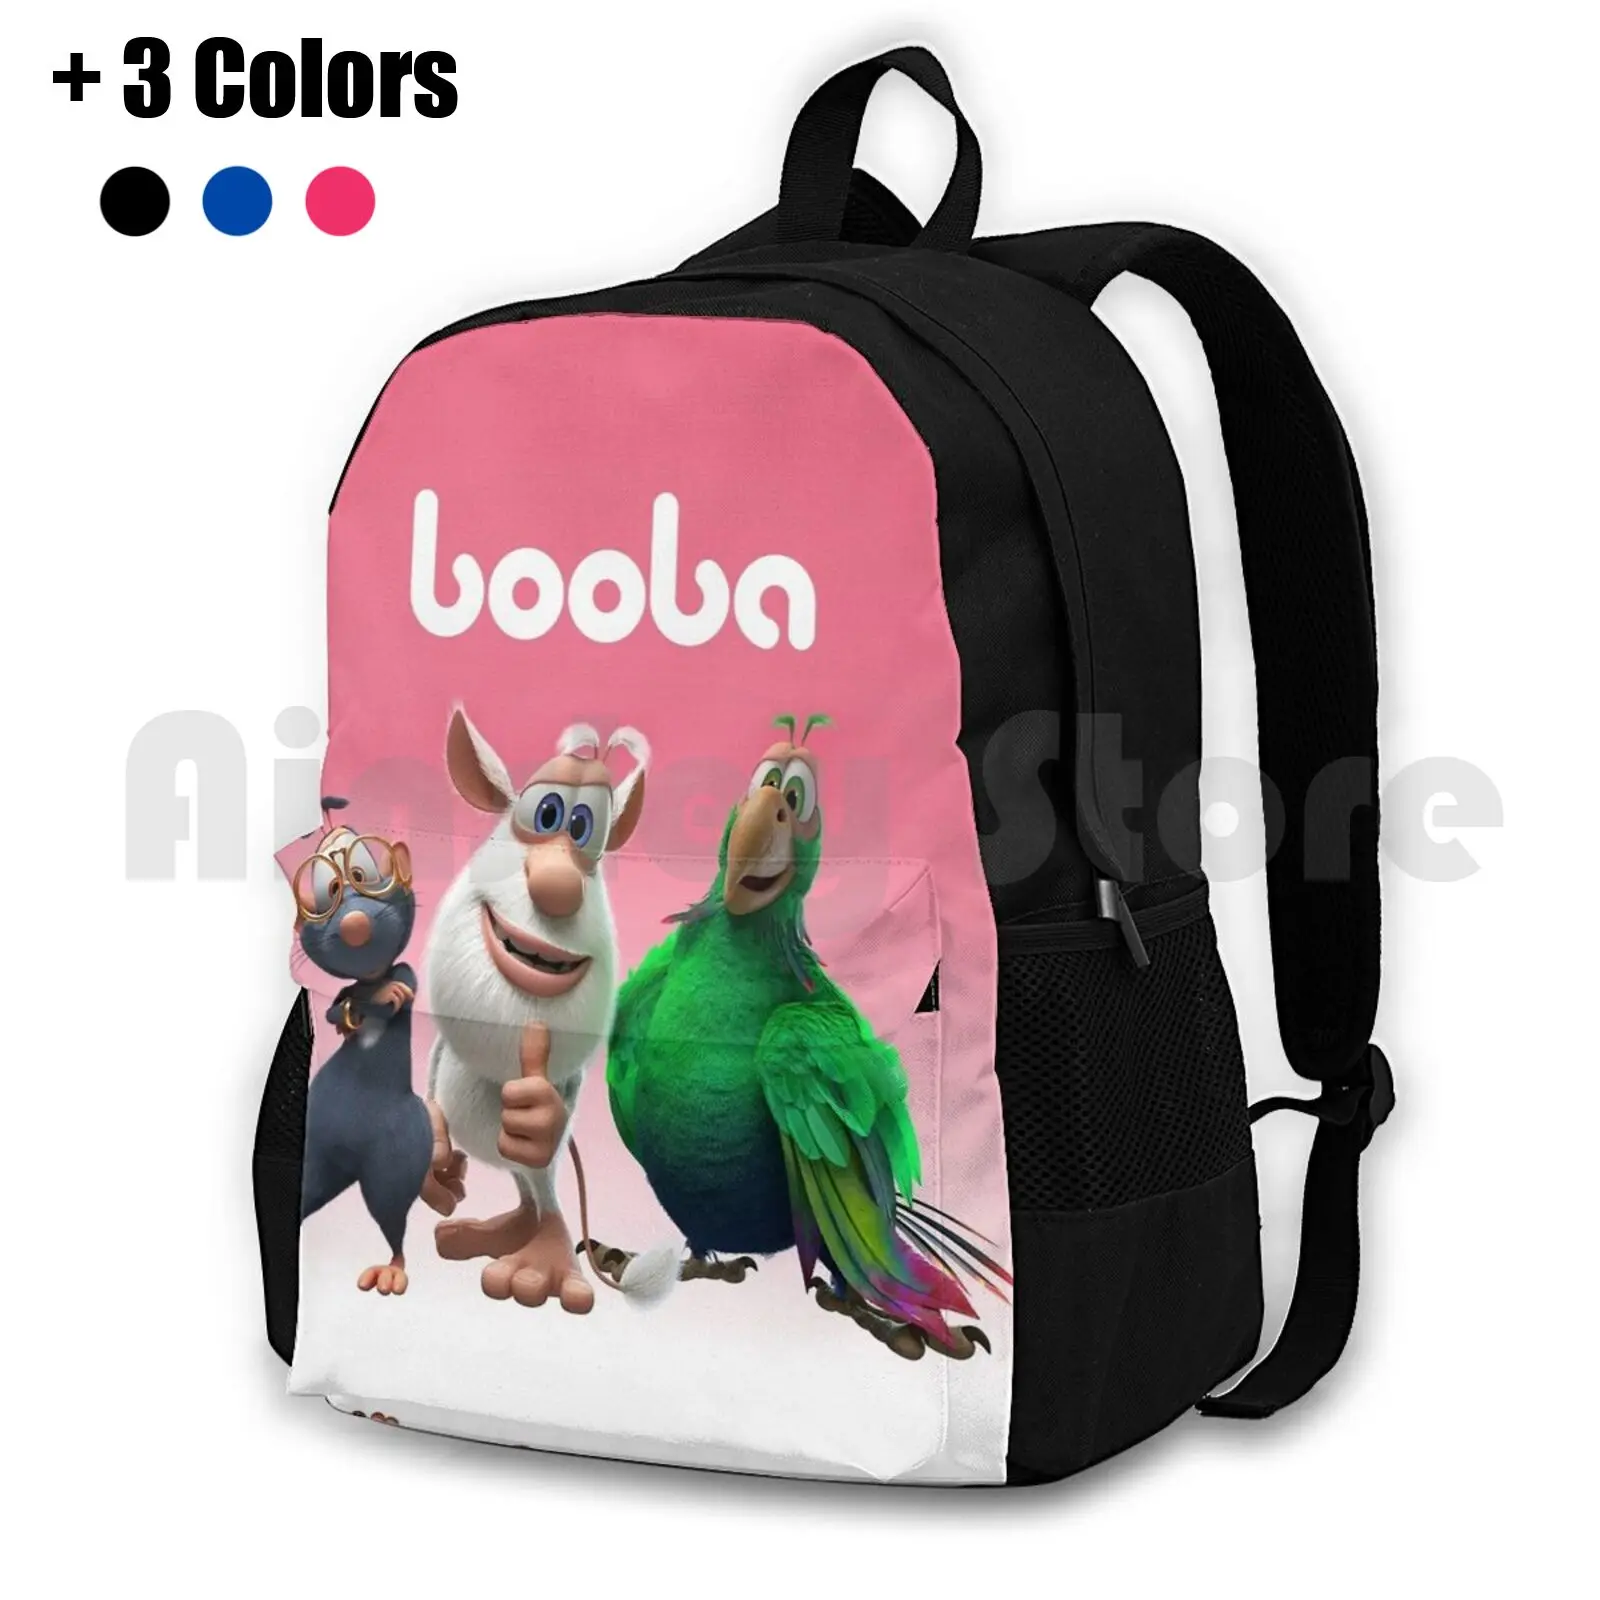 

Fivebo New Animation For Kids 2020 Outdoor Hiking Backpack Waterproof Camping Travel Cartoon 2021 Kids Cover Series